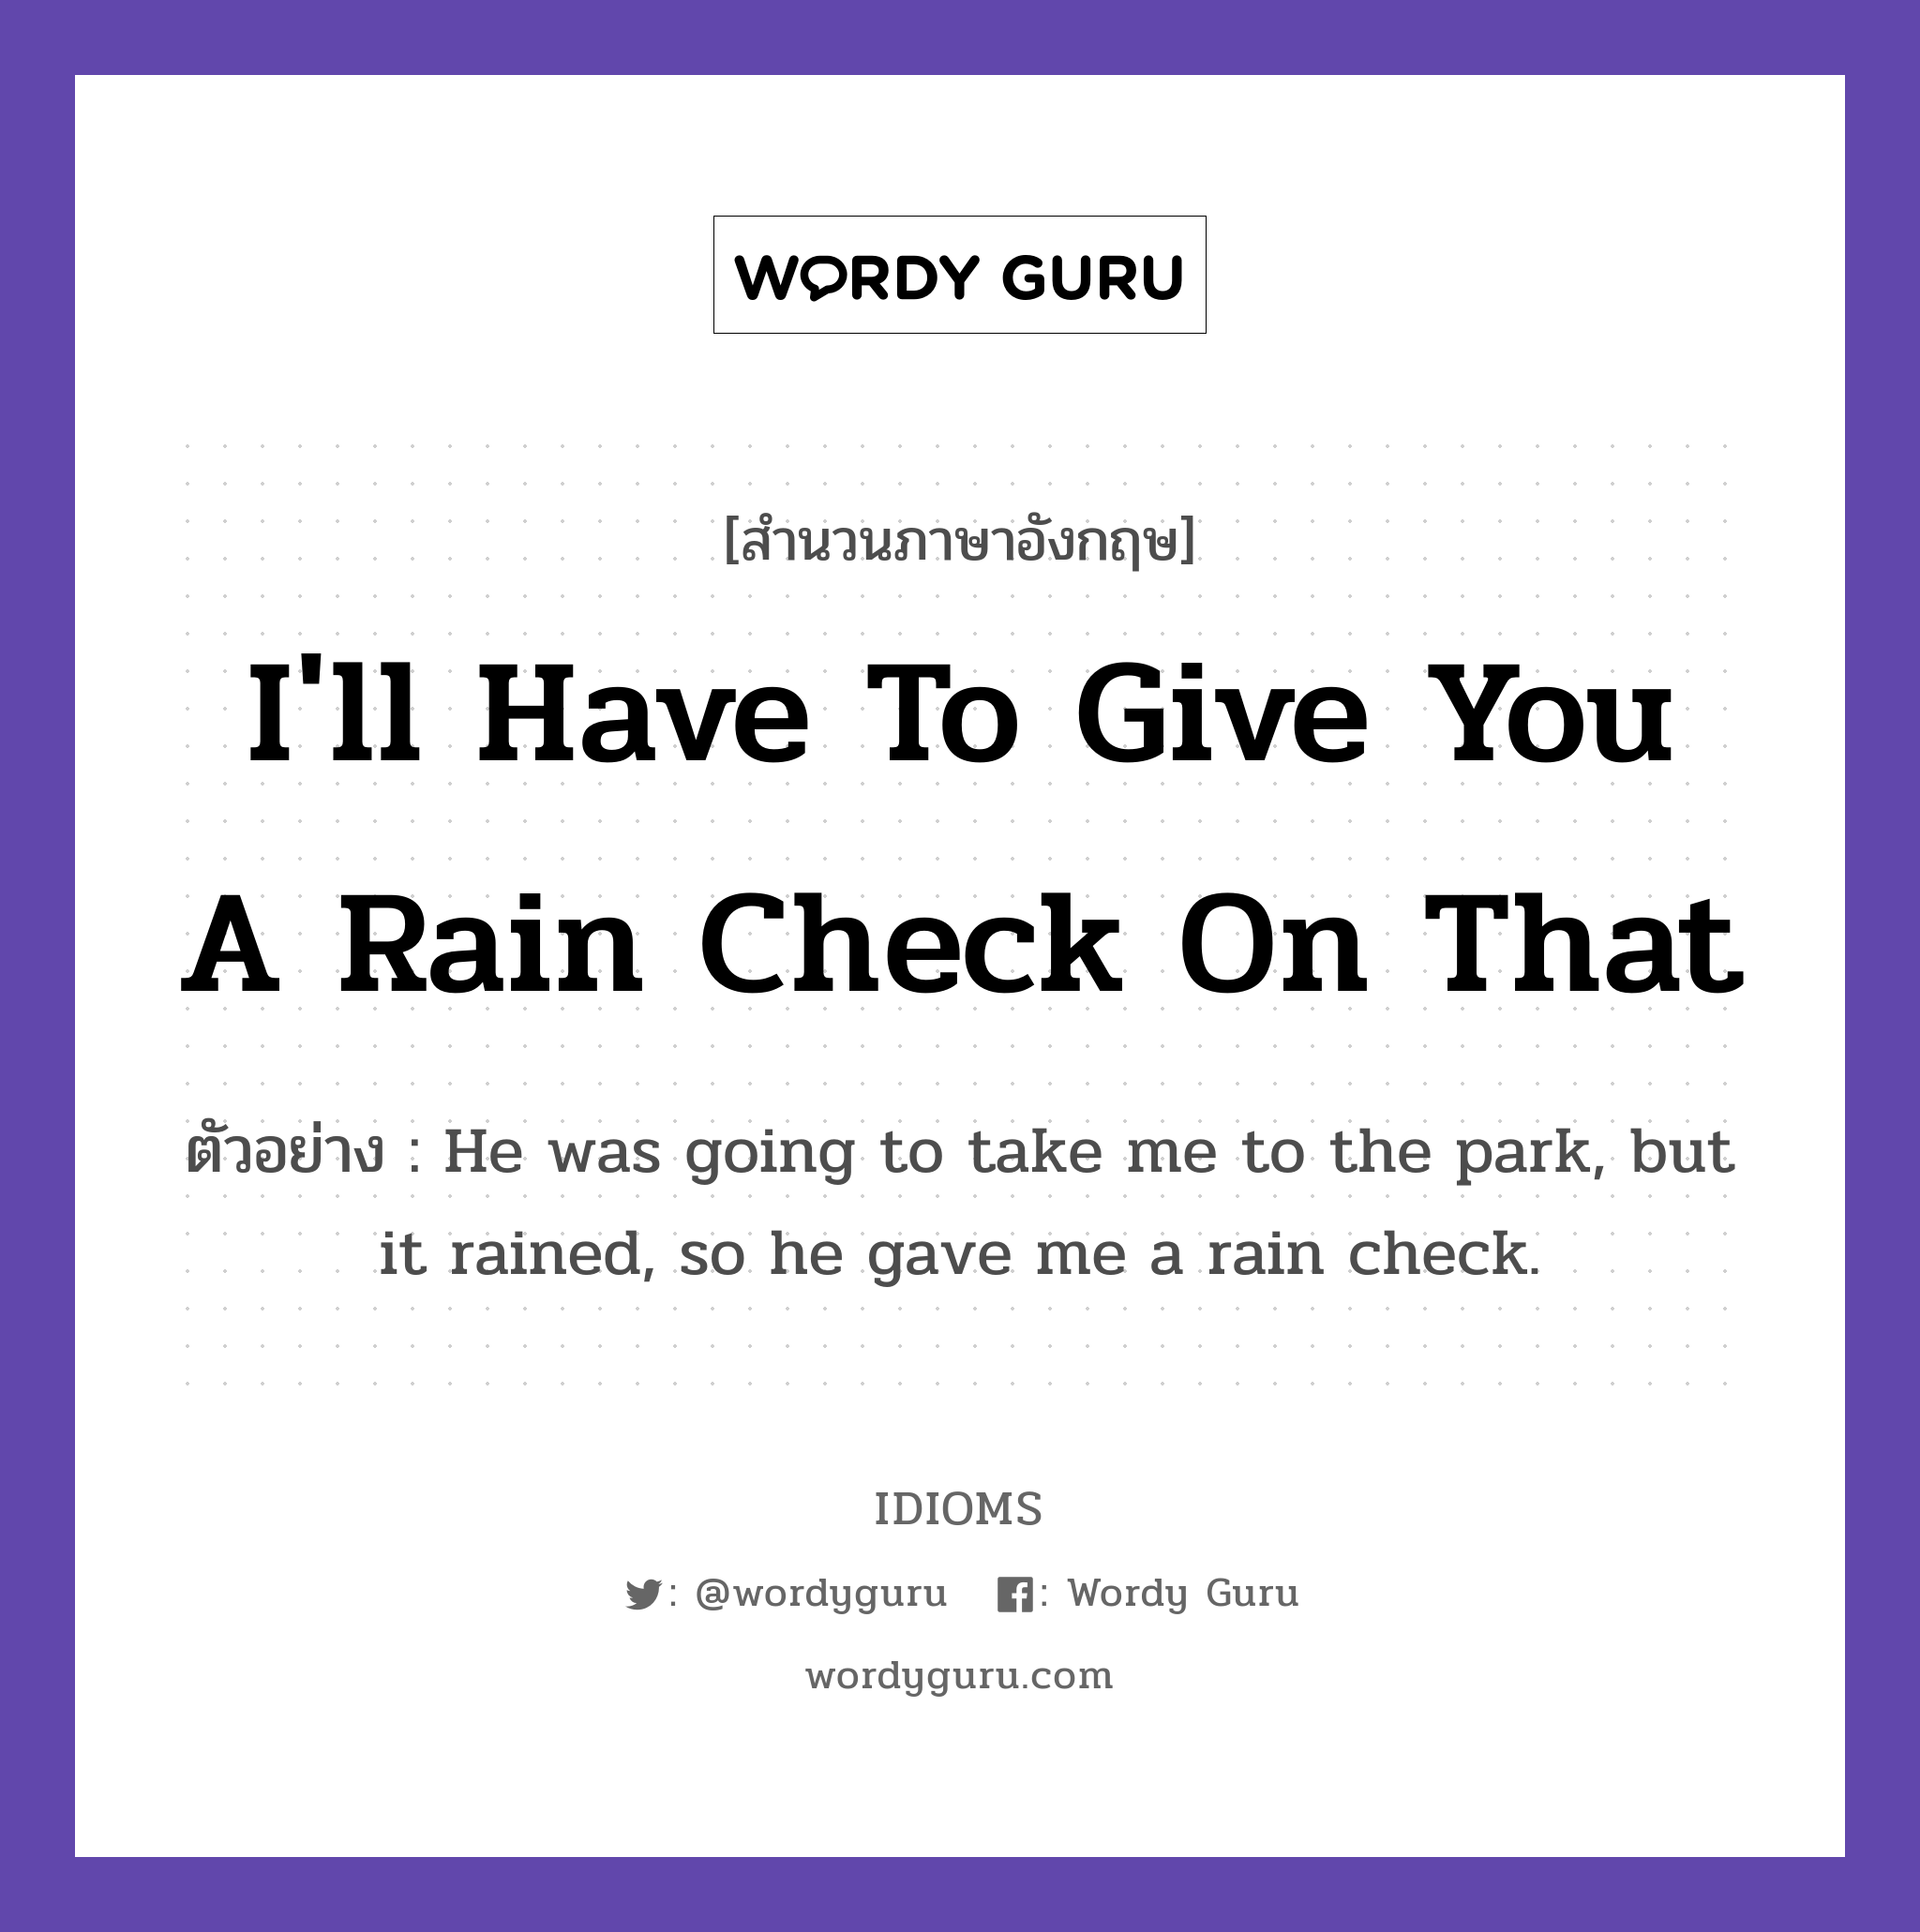 I'll Have To Give You A Rain Check On That แปลว่า?, สำนวนภาษาอังกฤษ I'll Have To Give You A Rain Check On That ตัวอย่าง He was going to take me to the park, but it rained, so he gave me a rain check.